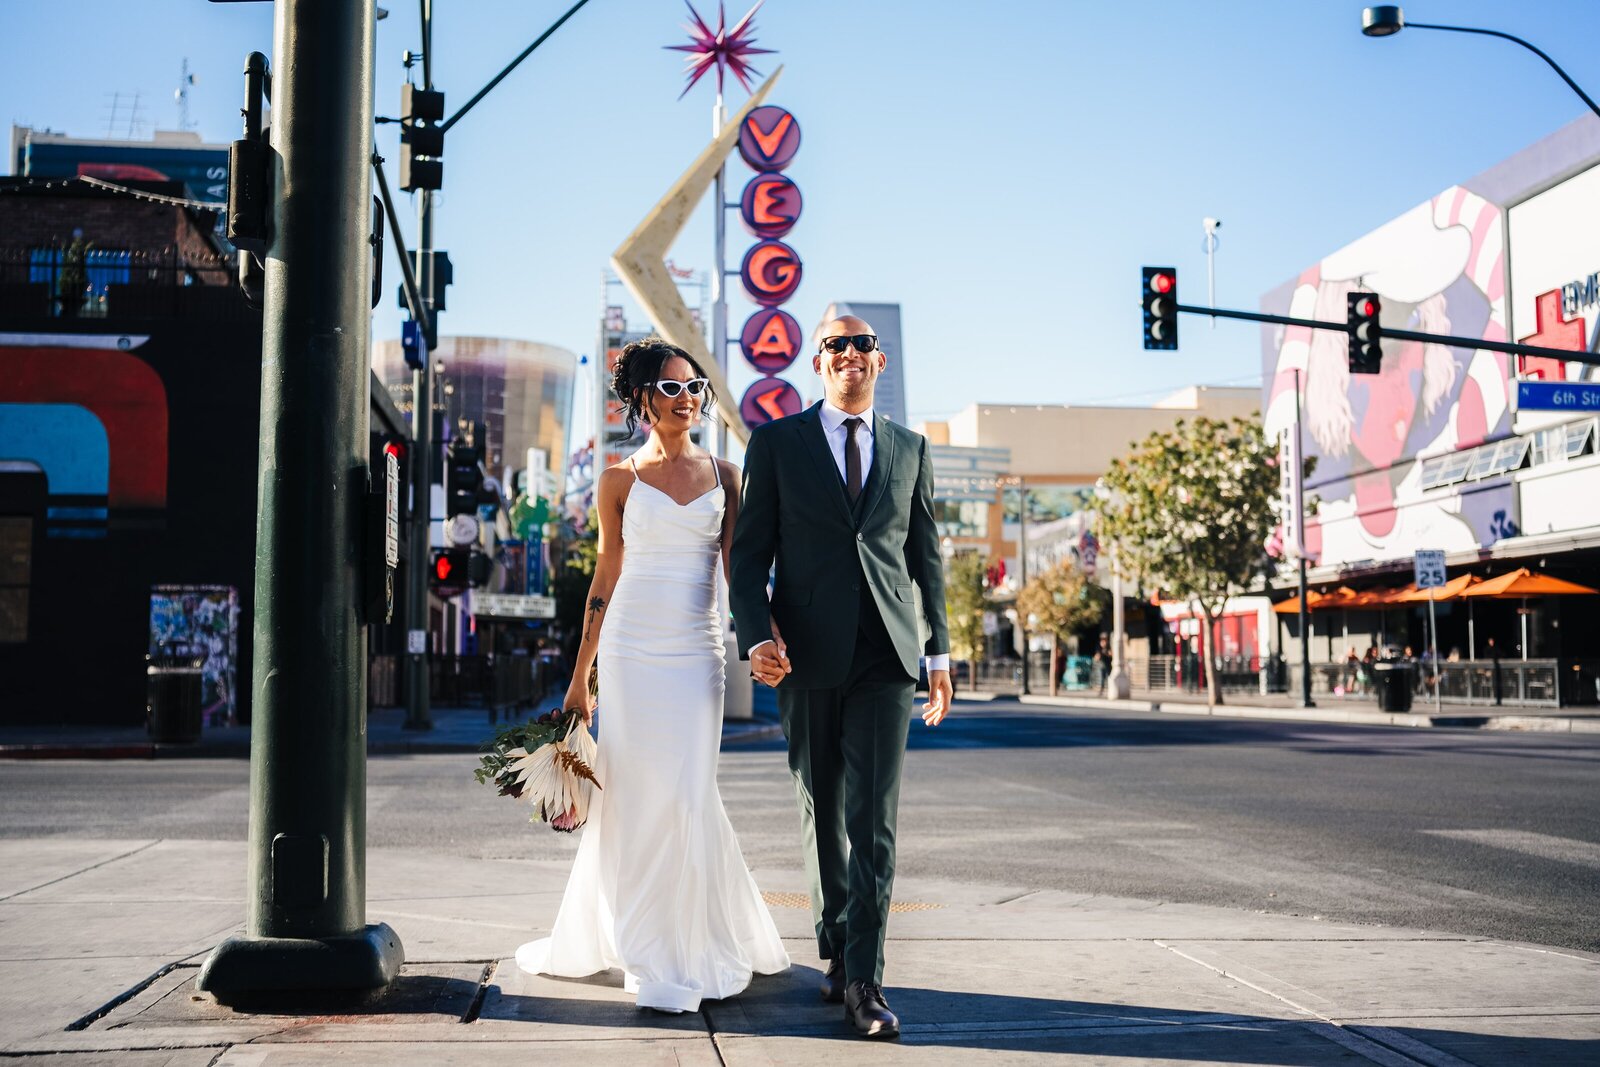 Newlyweds, hand in hand, taking a romantic stroll in downtown Las Vegas.